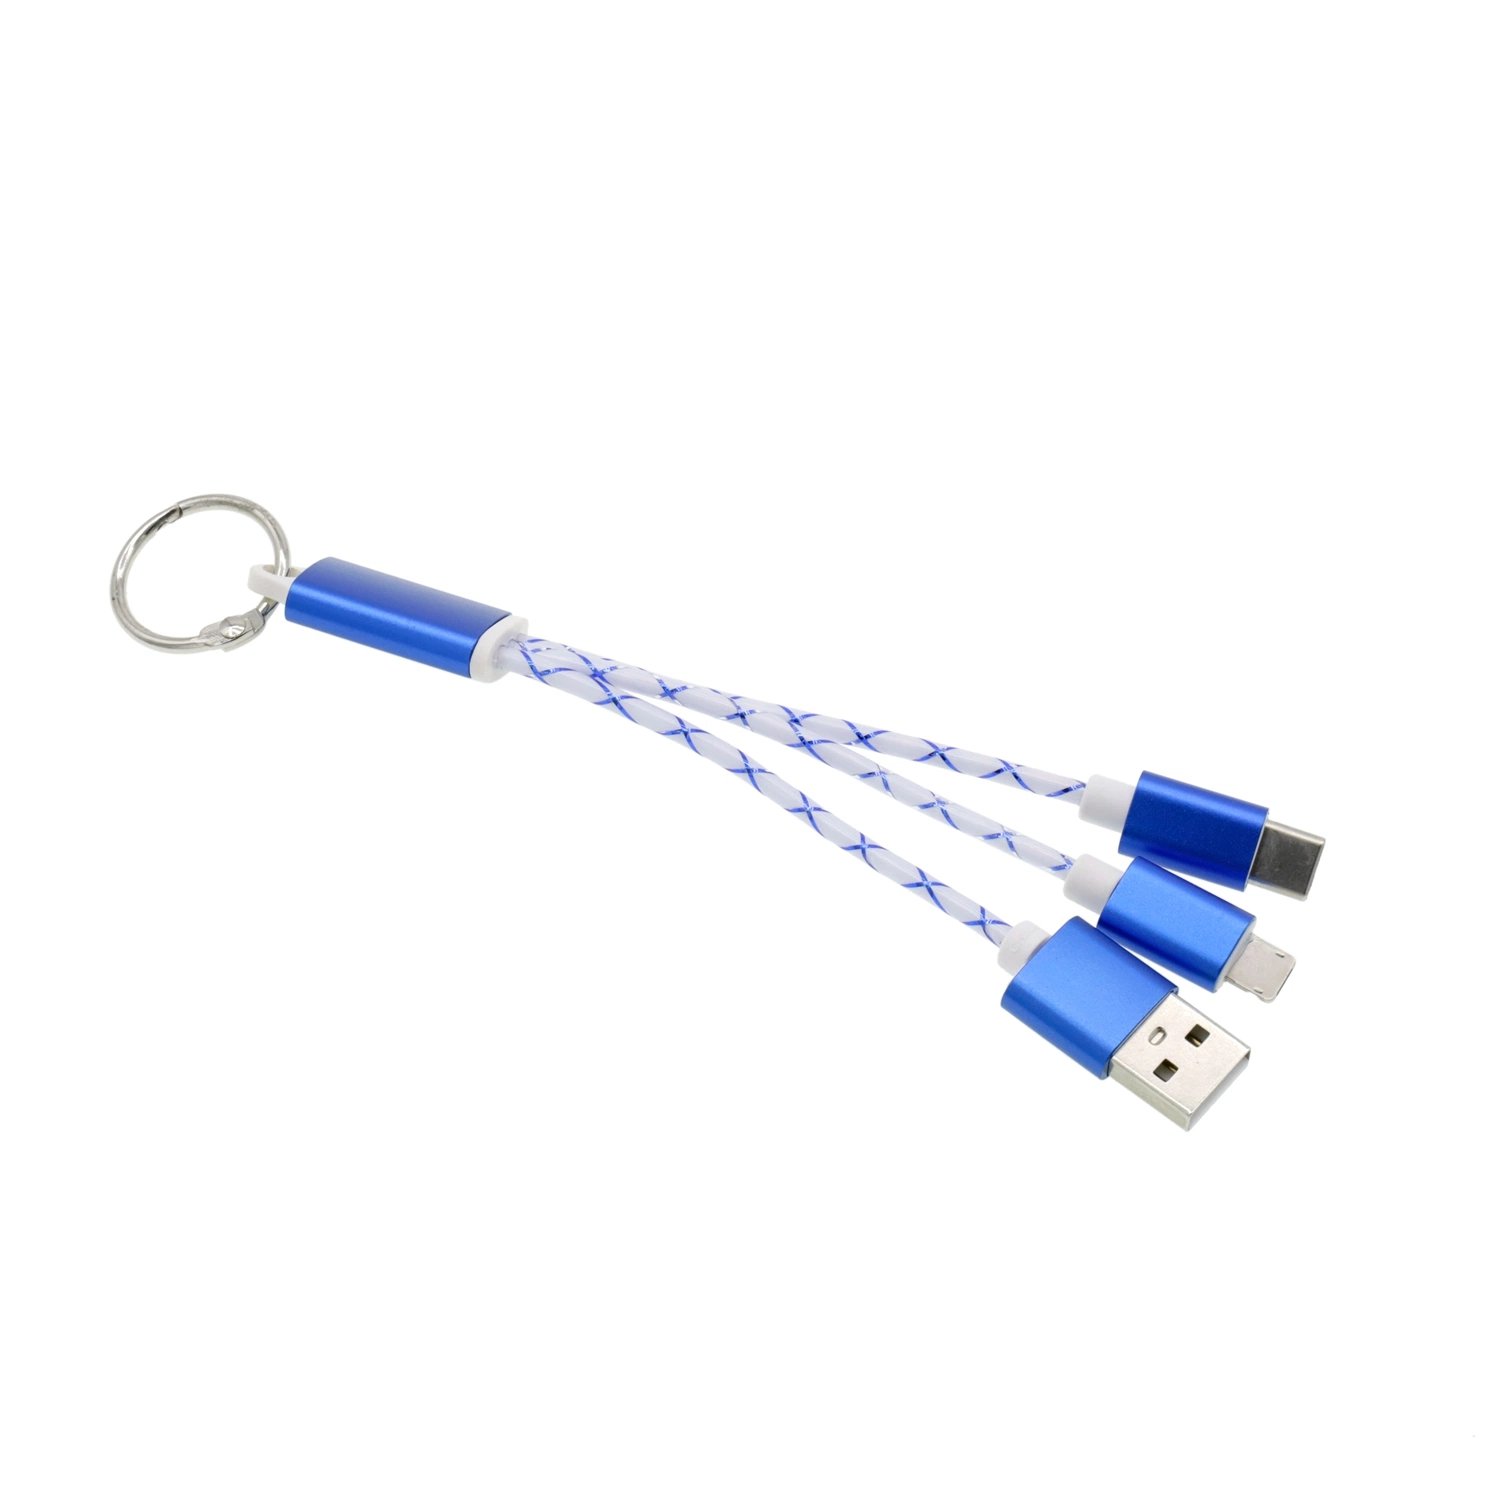 Factory Made 3 in 1 USB SATA Type-C Cable Adapter Converter Cable USB Data Cable